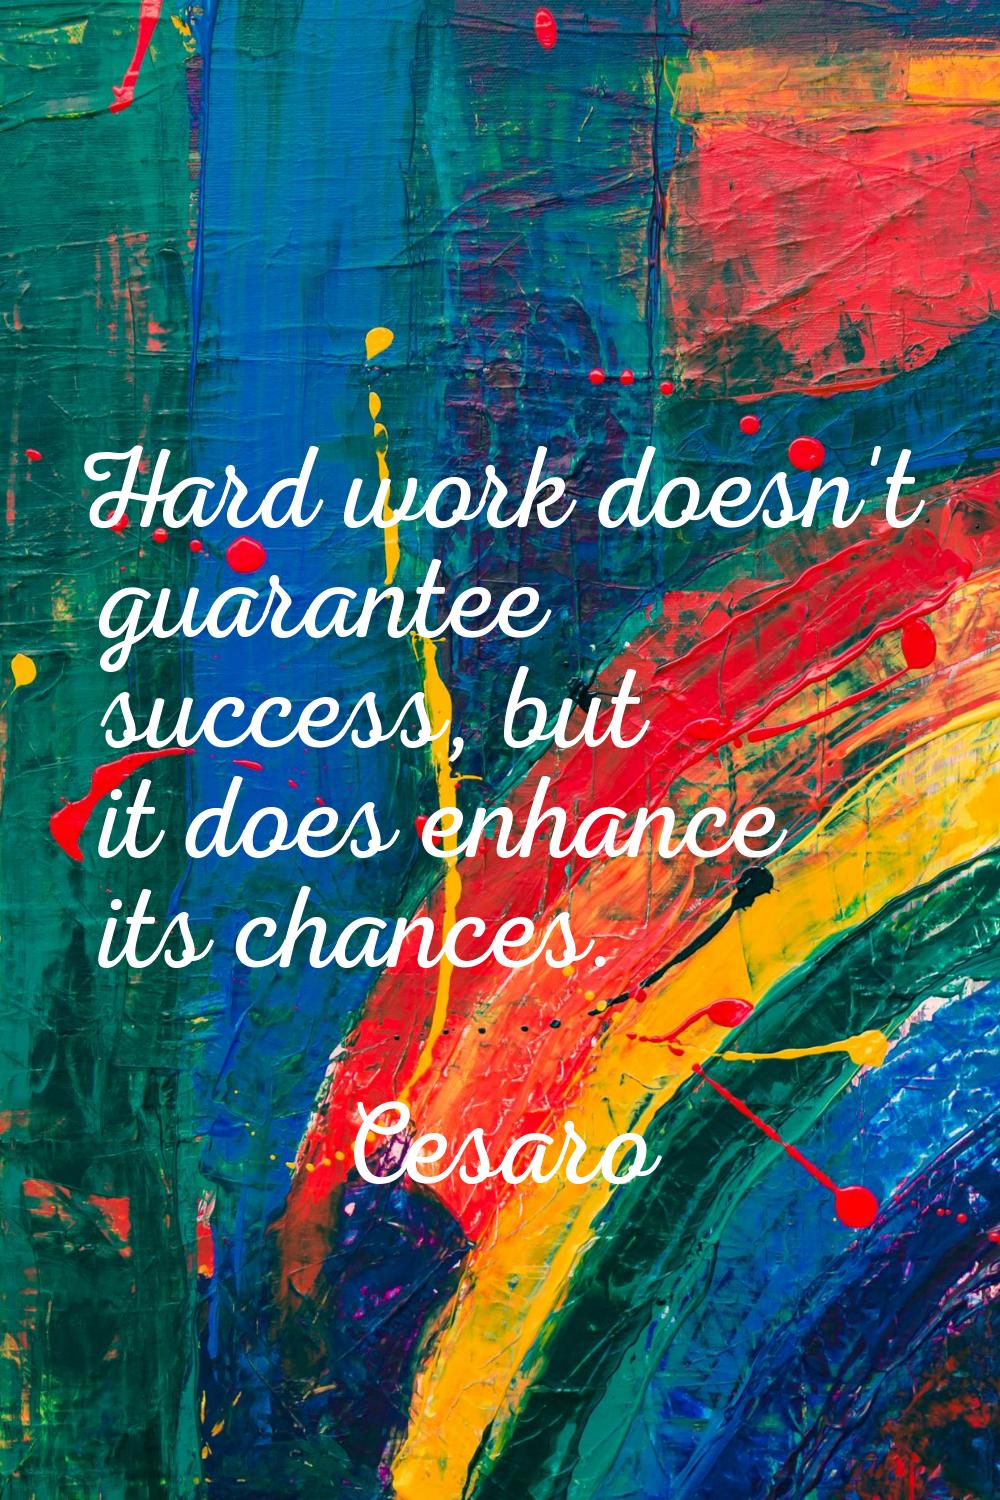 Hard work doesn't guarantee success, but it does enhance its chances.